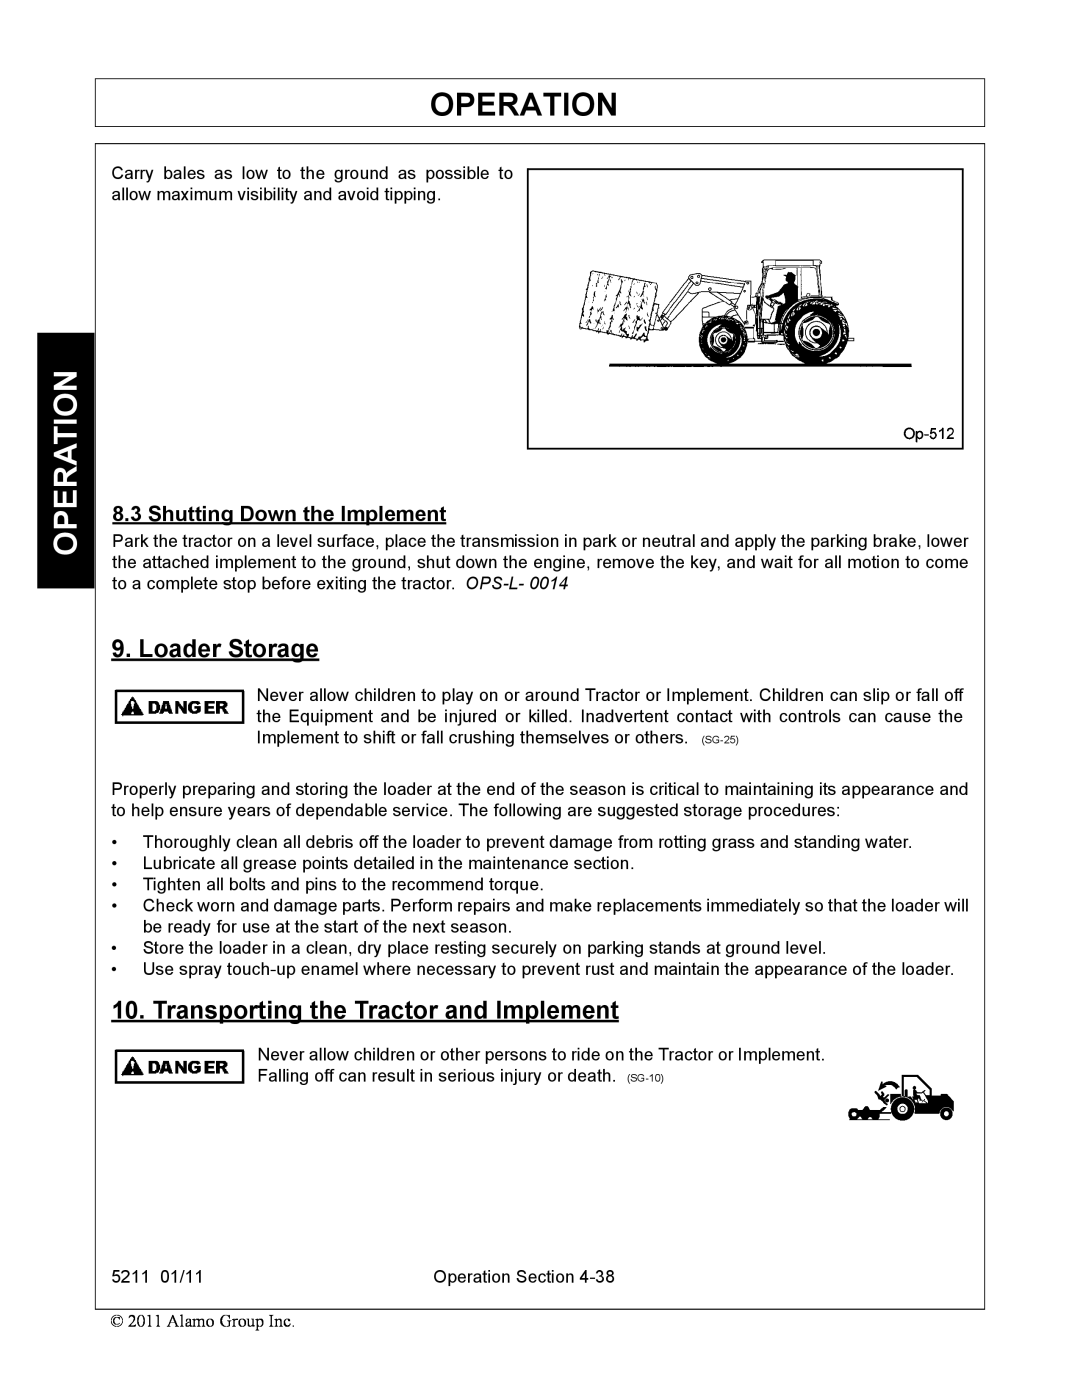 Servis-Rhino 5211 manual Operation, Loader Storage, Transporting the Tractor and Implement, Shutting Down the Implement 